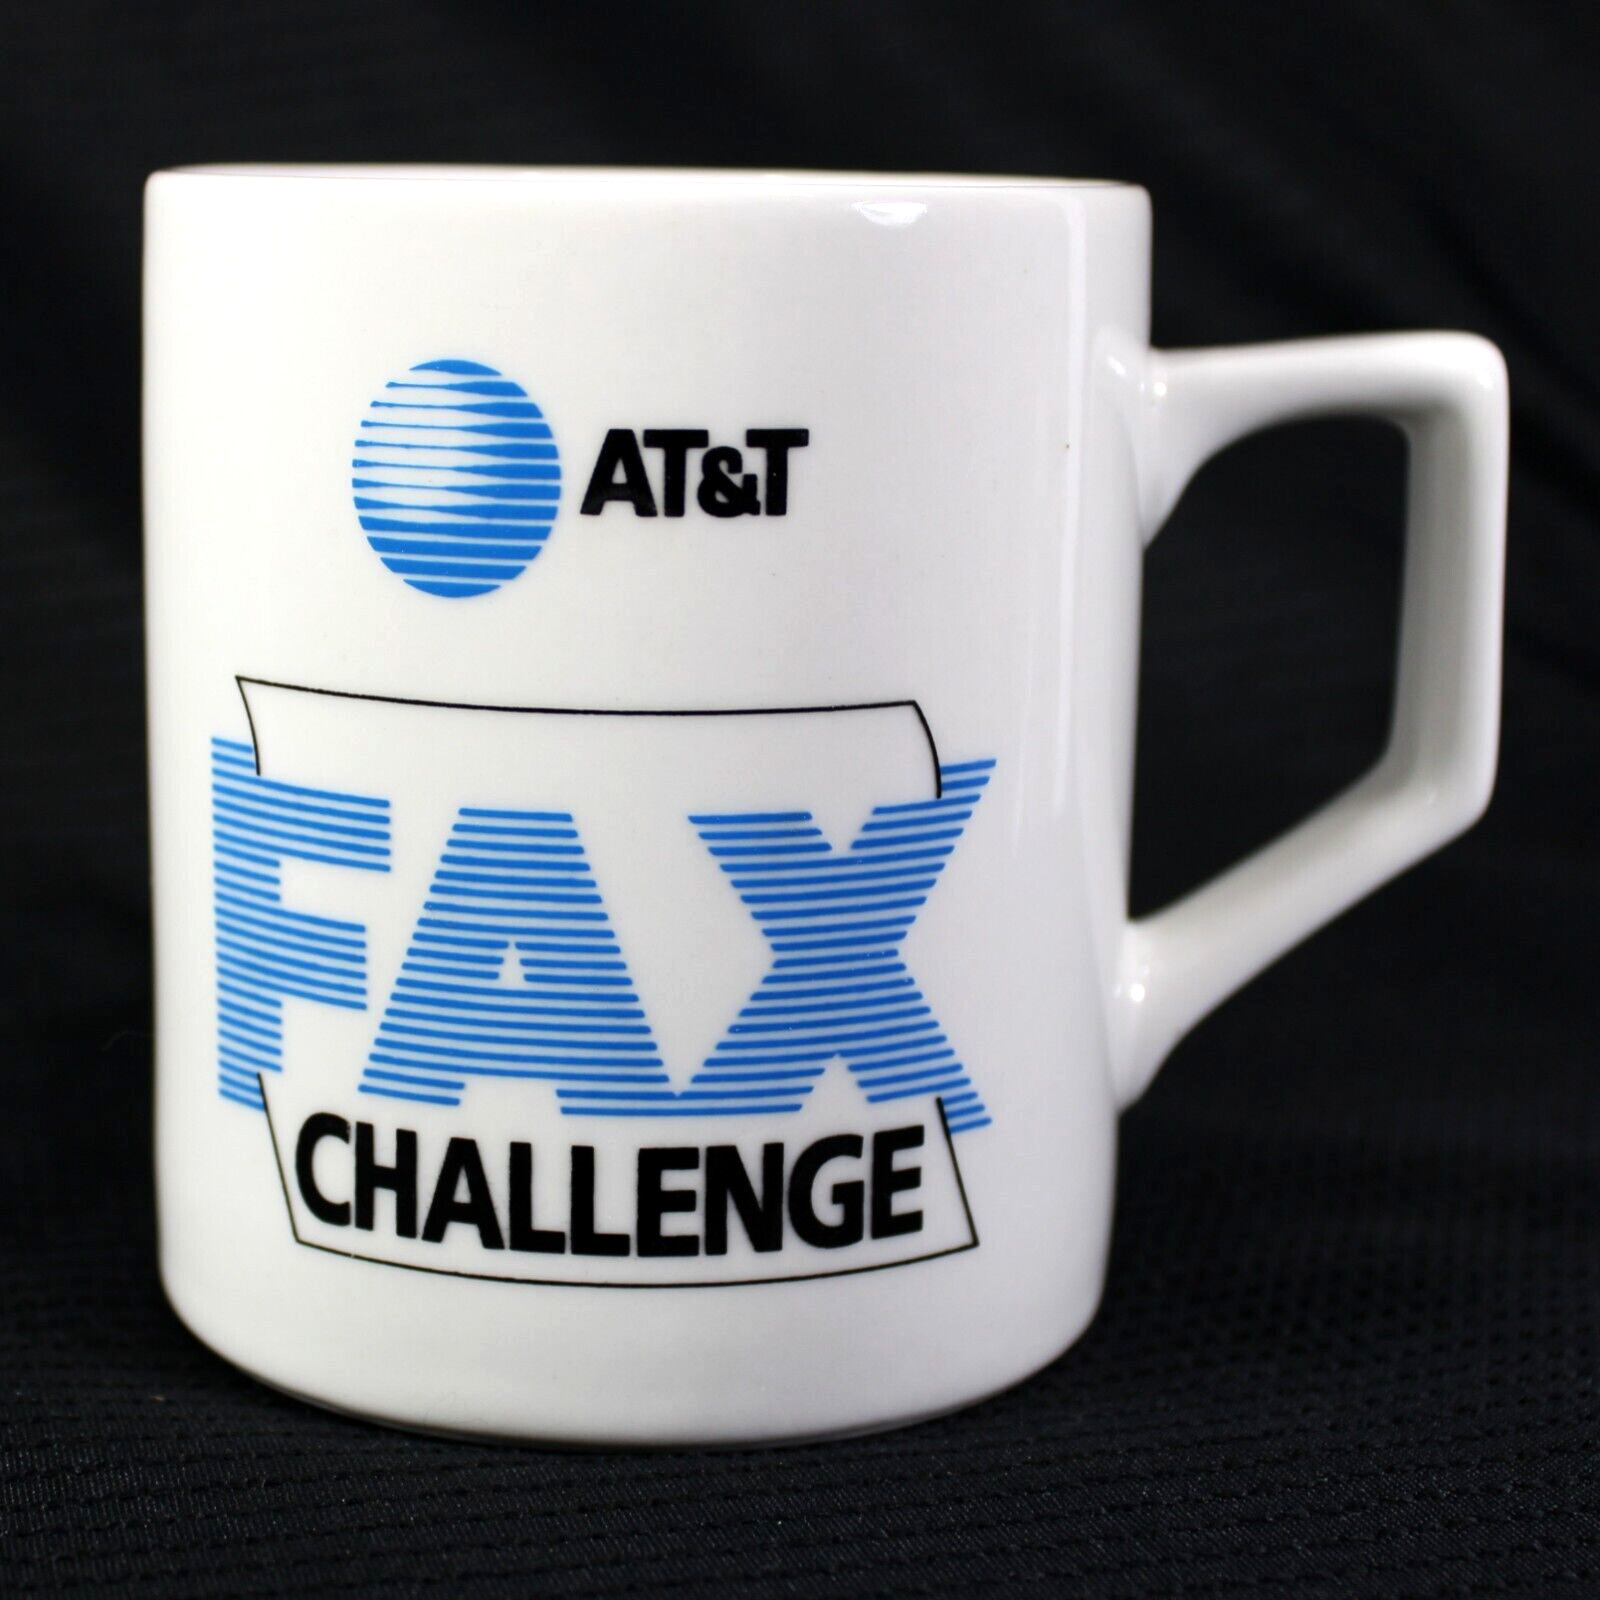 Vintage  AT&T Fax Challenge Mug Ceramic Coffee Cup Telephone Company